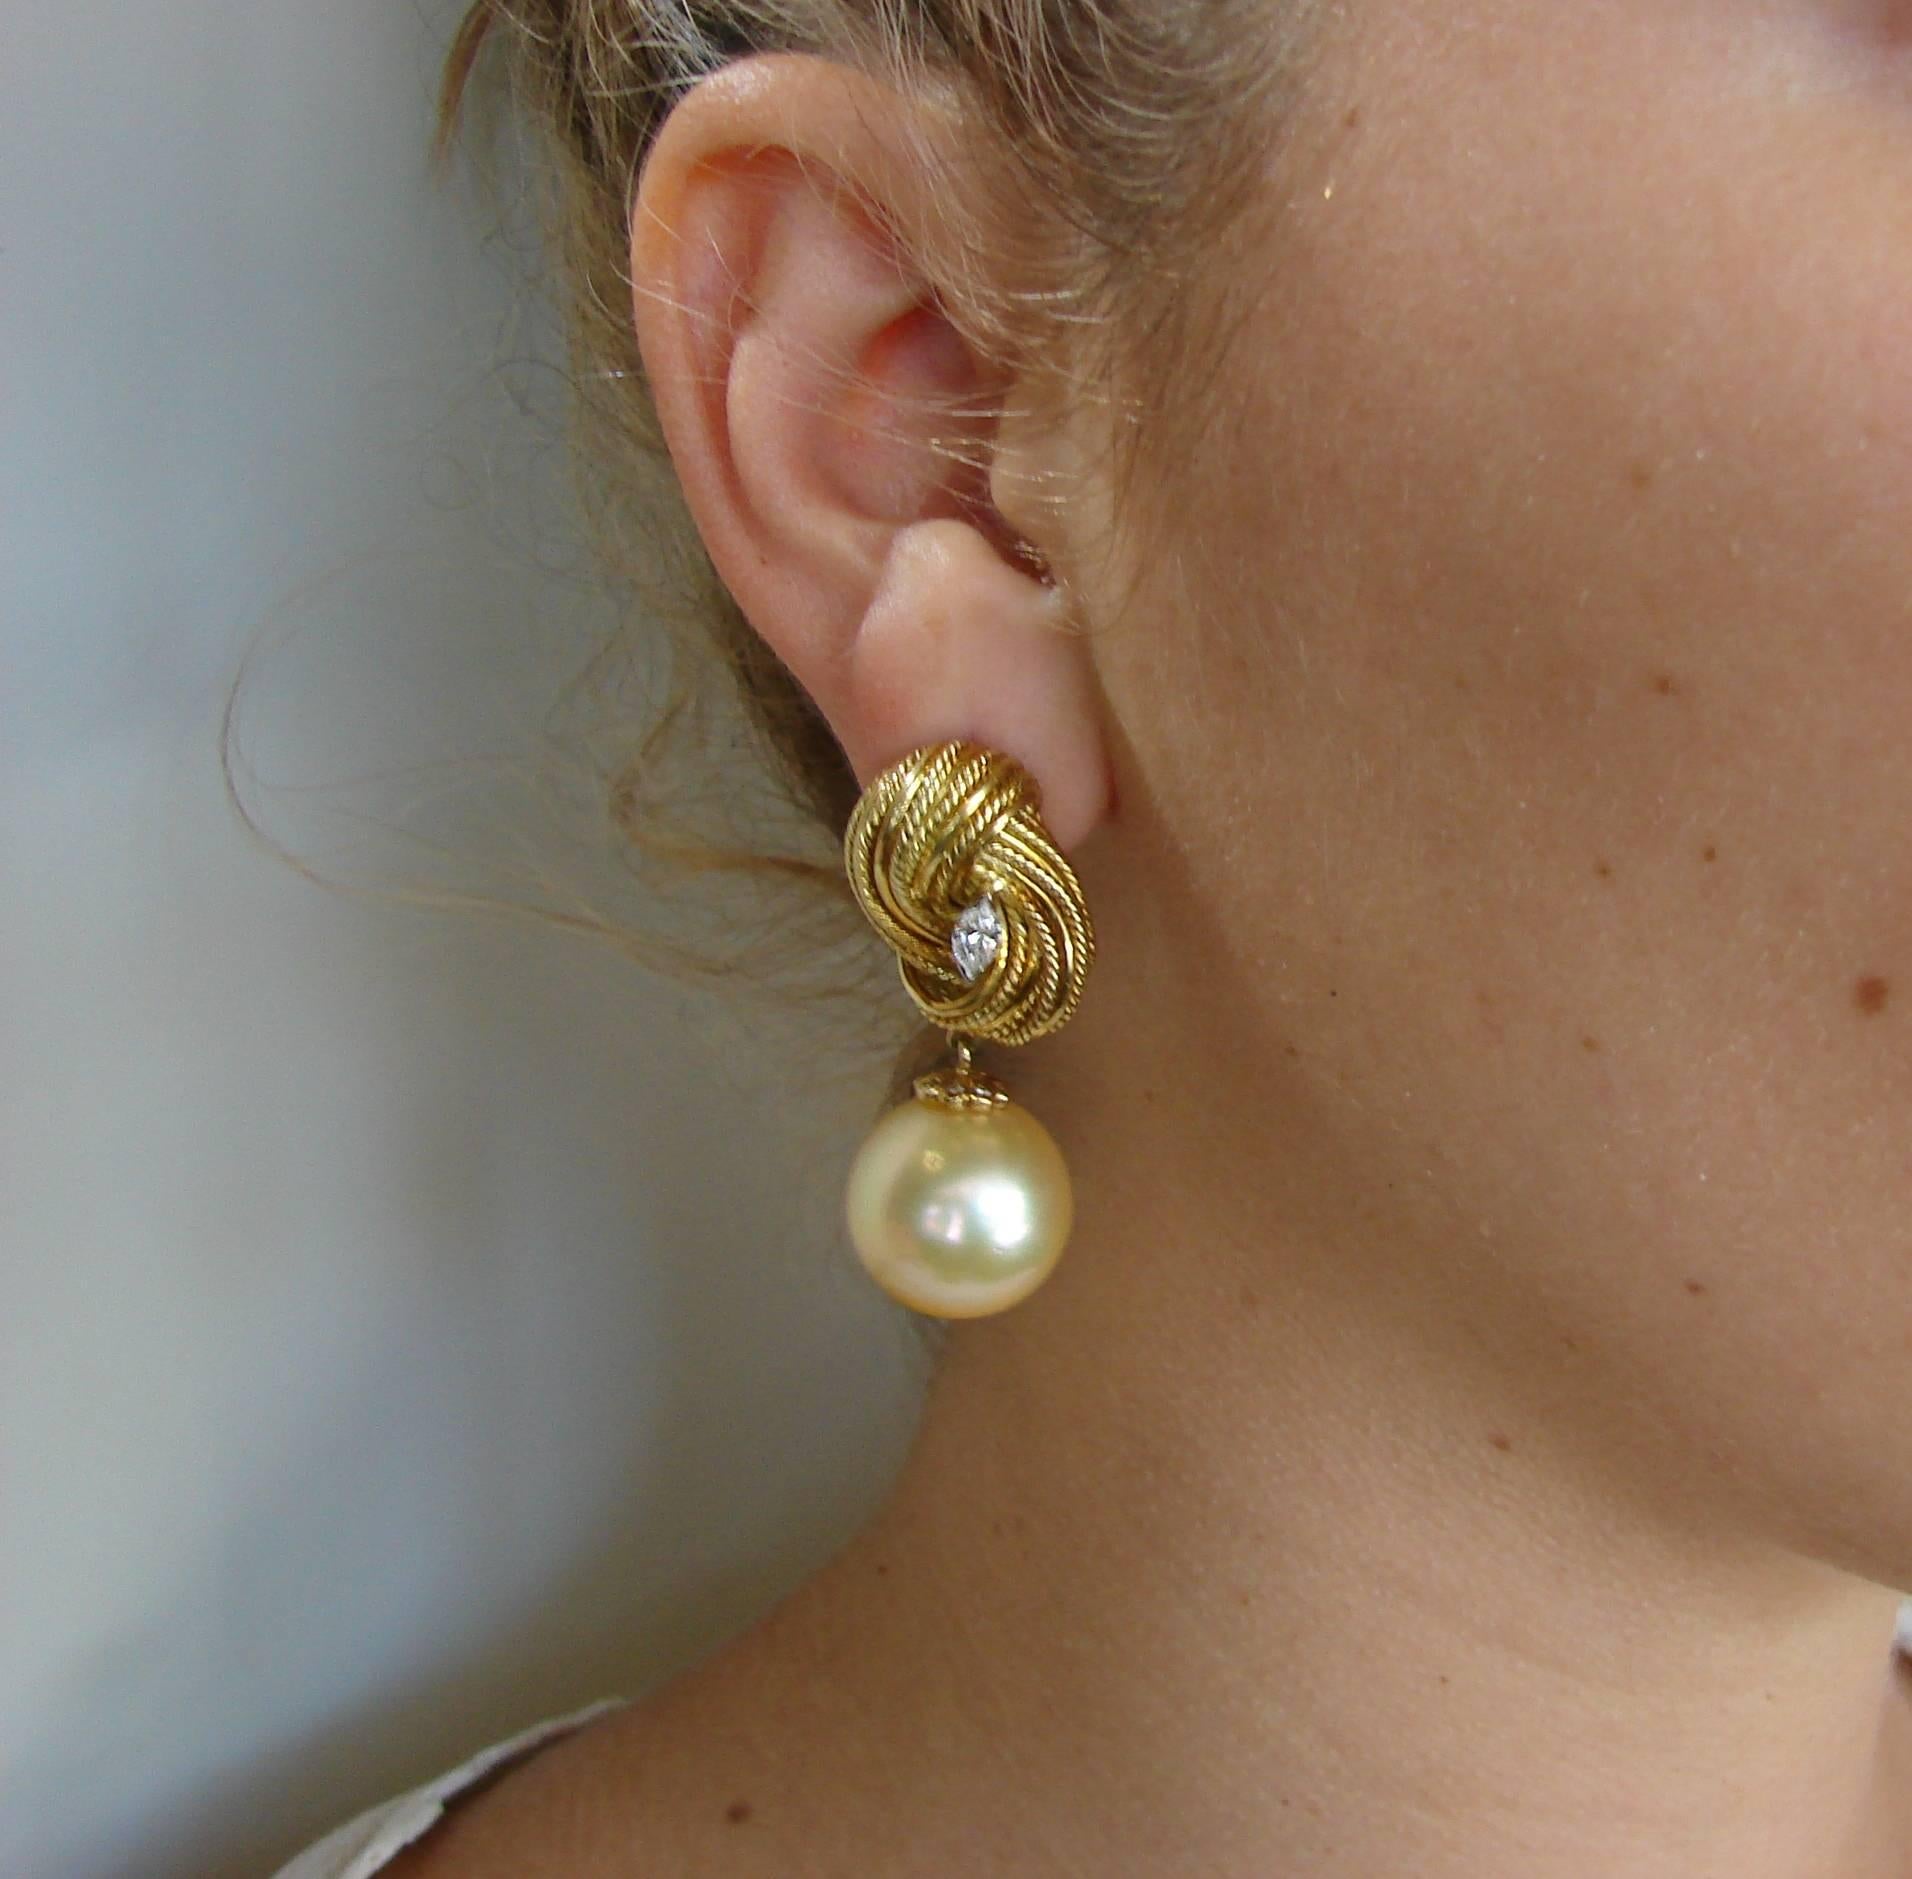 A pair of classy earrings created by Tiffany & Co. in Italy in the 1980s. It features two South Sea pearls, white and golden, set in 18 karat yellow gold setting and accented with two marquise cut diamonds (total weight approximately 0.40 carat).